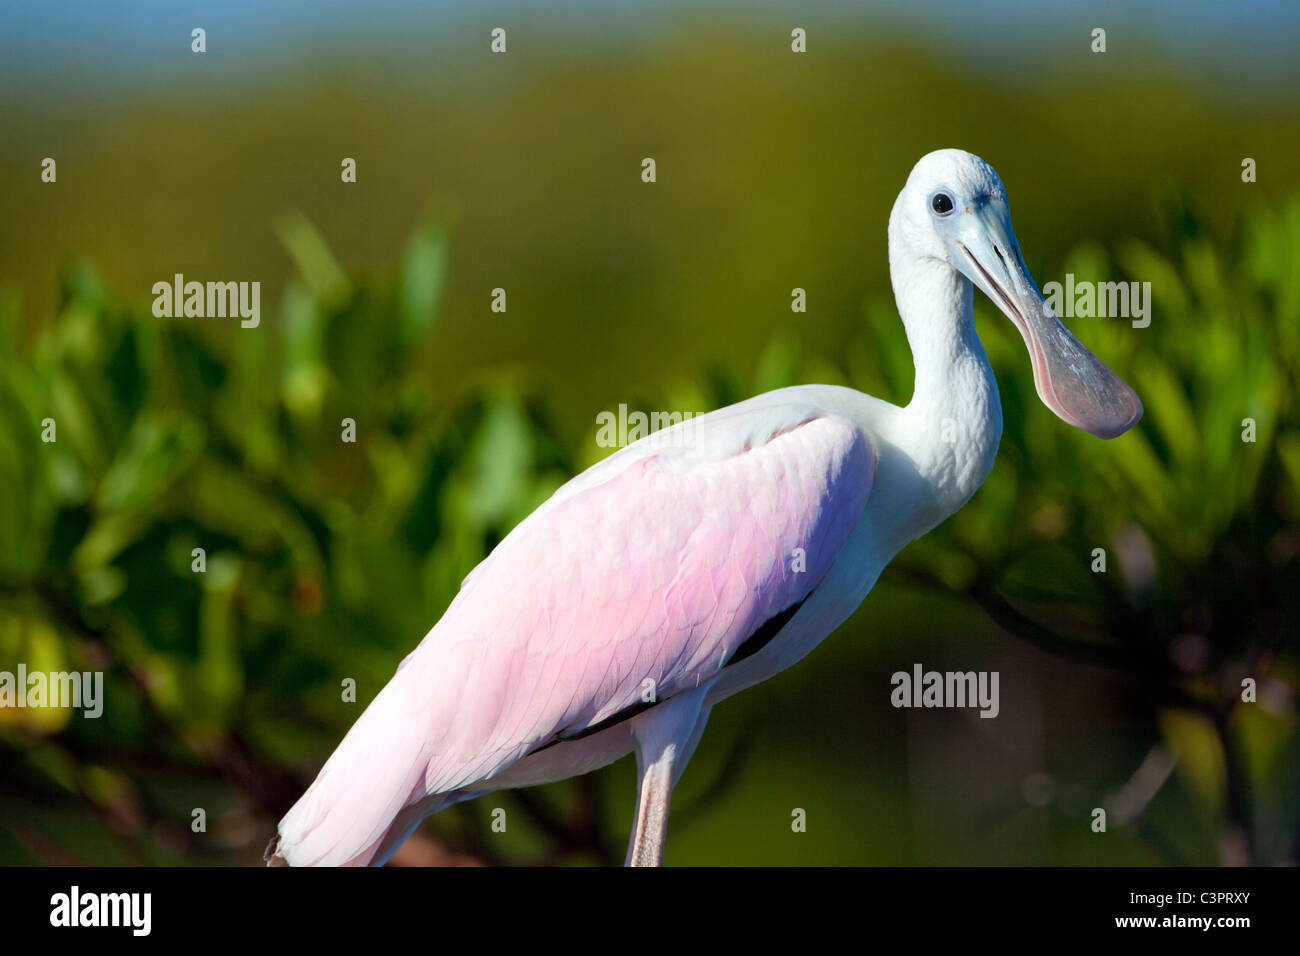 A roseate spoonbill (Ajaja ajaja) bird rests along the banks of a mangrove forest in Cuba. Stock Photo